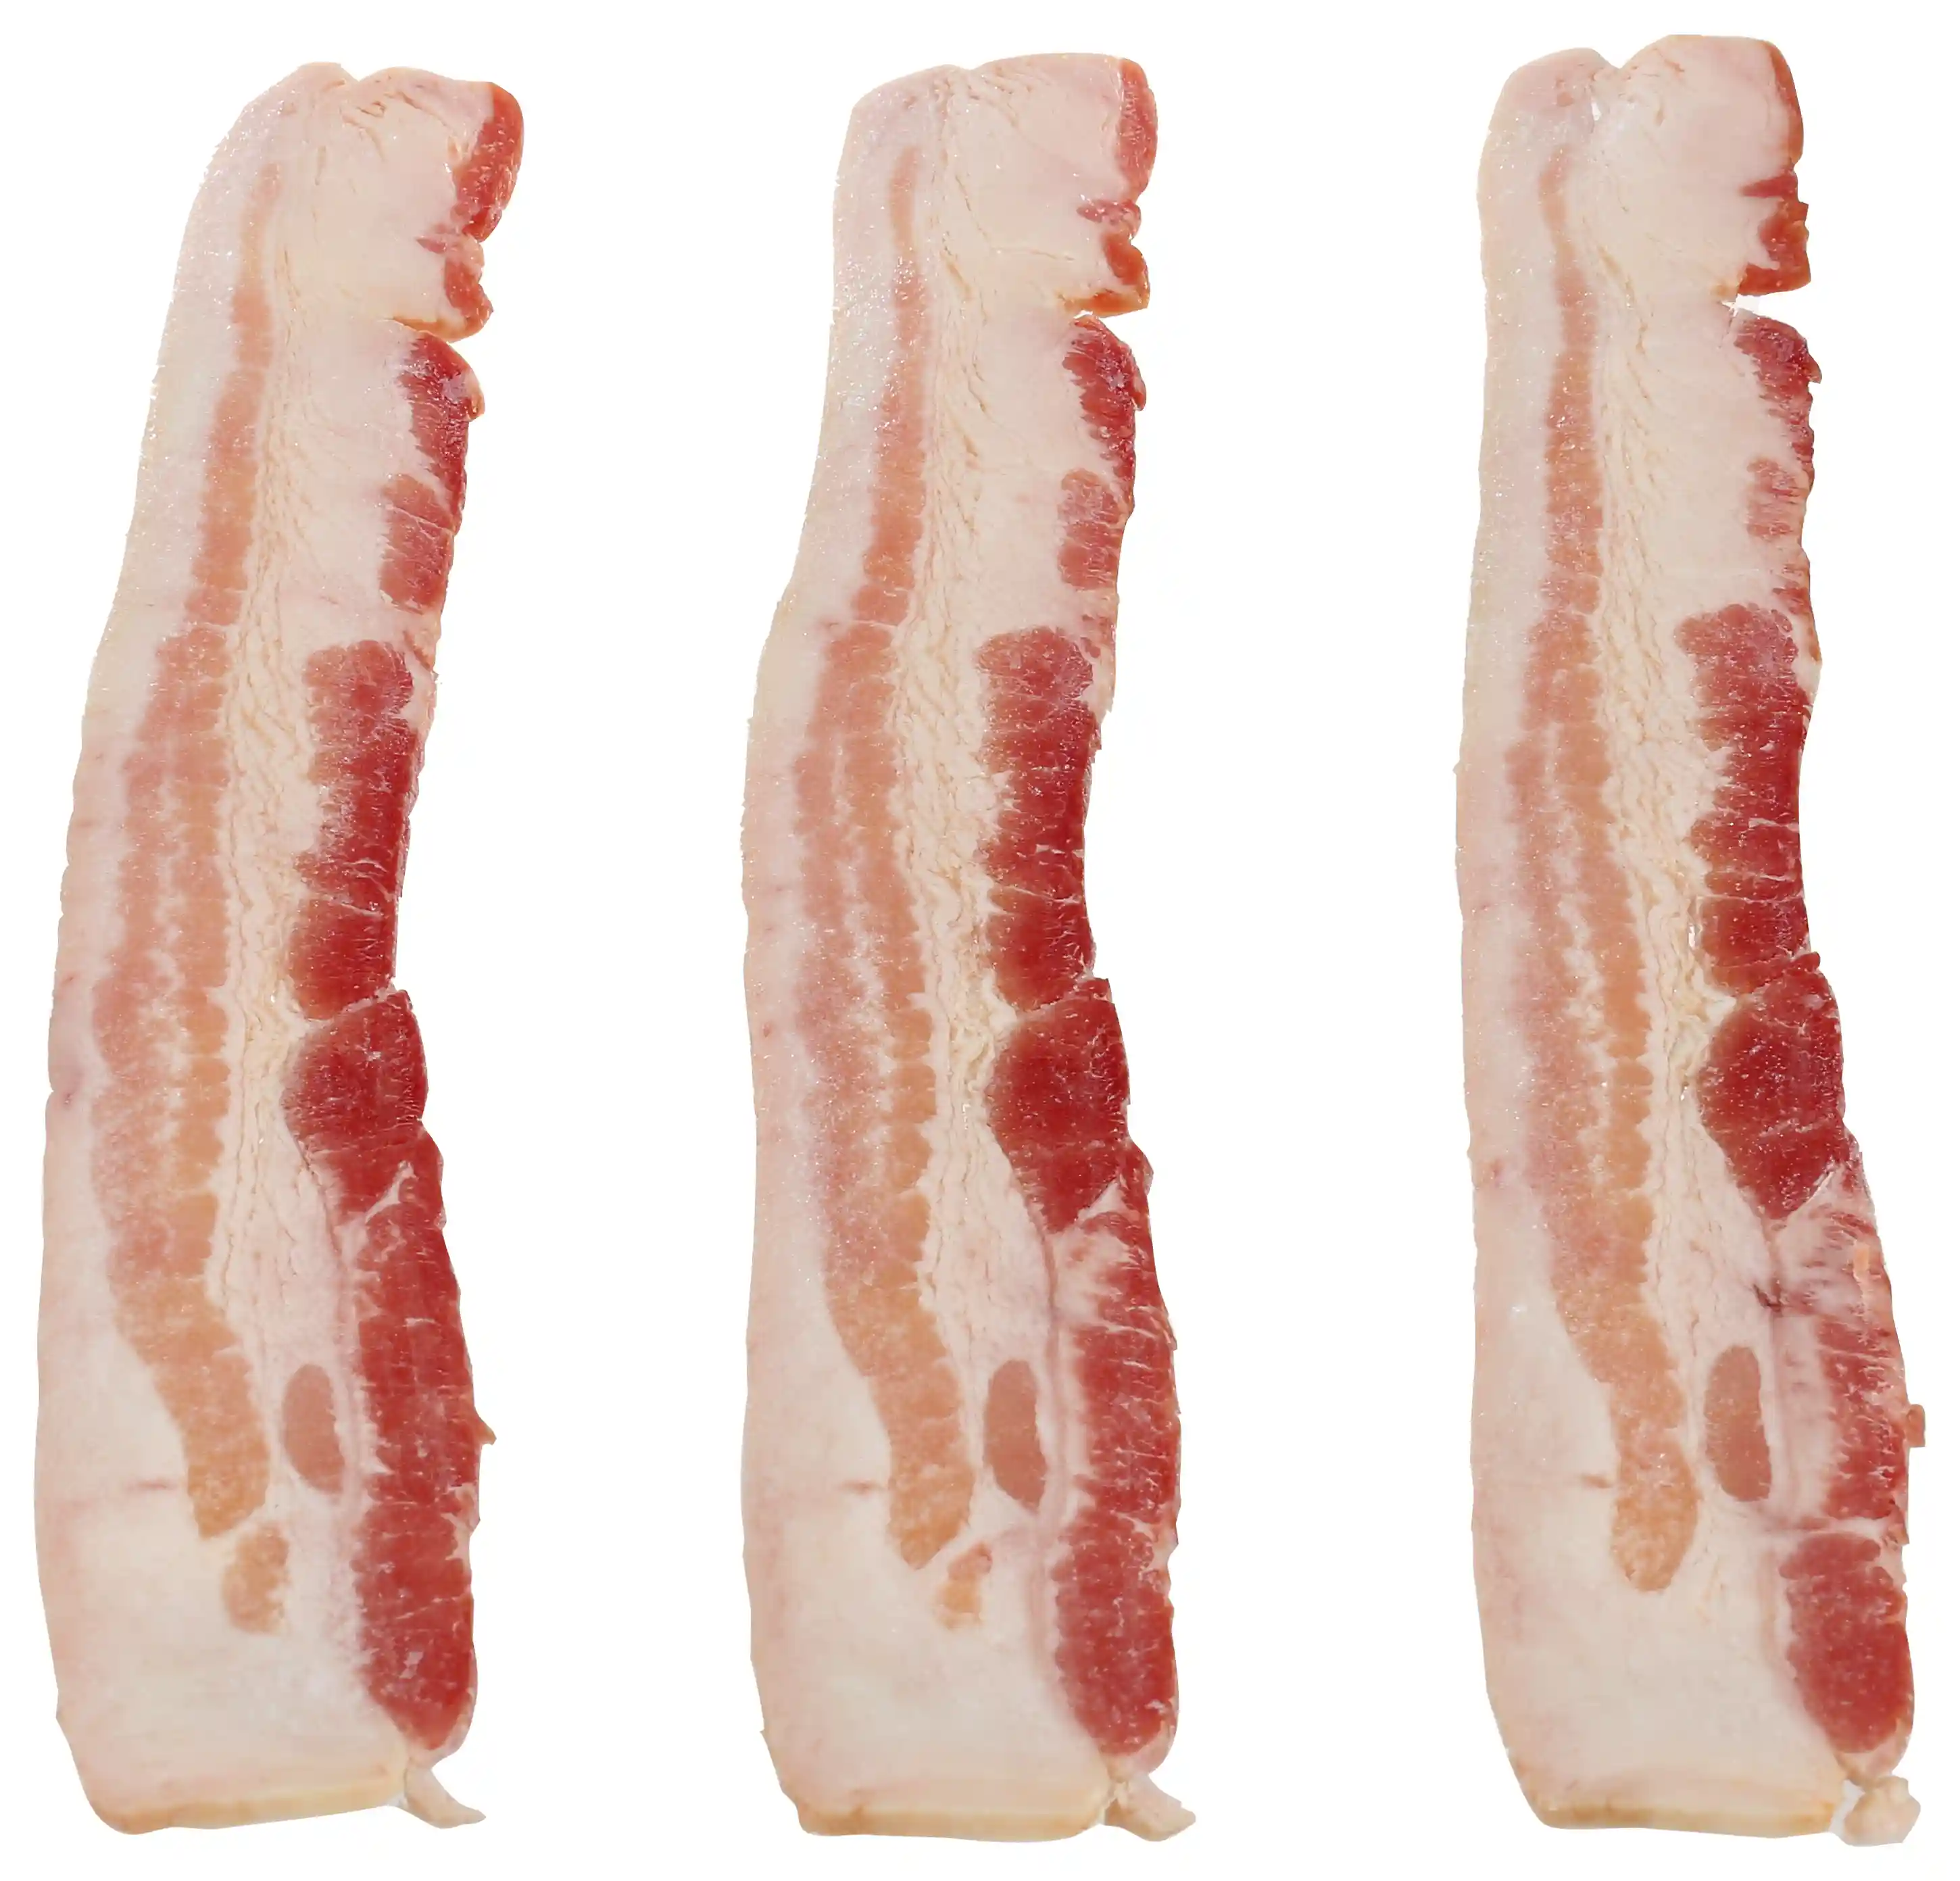 Wright® Brand Naturally Hickory Smoked Thin Sliced Bacon, Bulk, 15 Lbs, 18-22 Slices per Pound, Gas Flushed_image_21